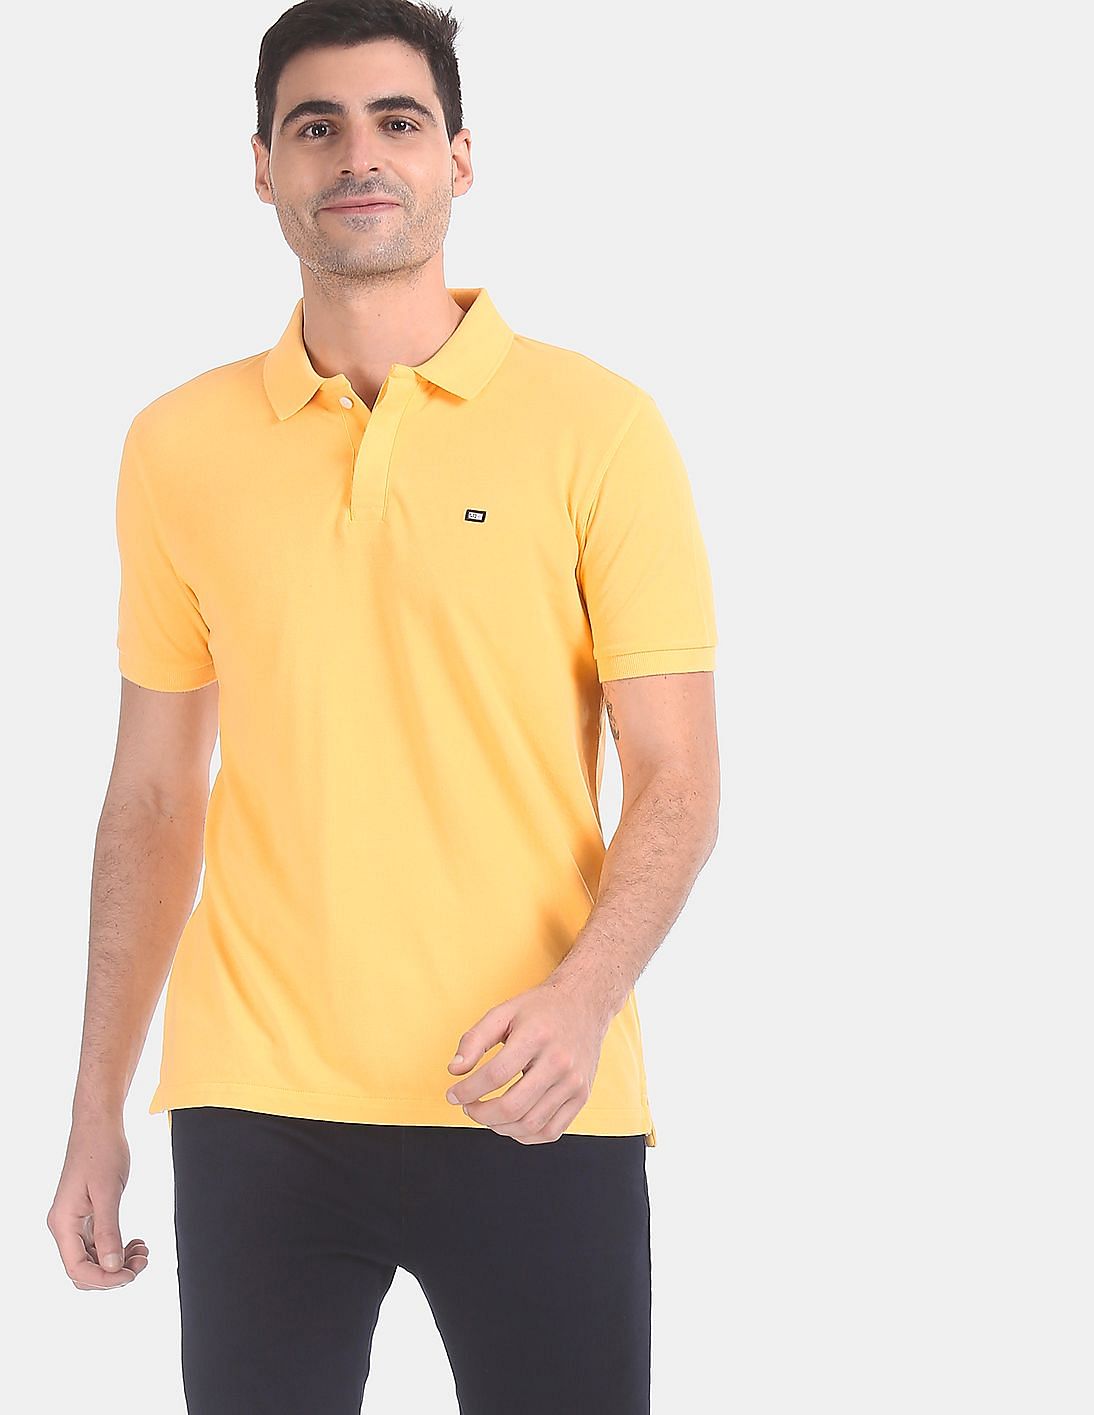 Buy Arrow Sports Yellow Concealed Placket Solid Polo Shirt - NNNOW.com